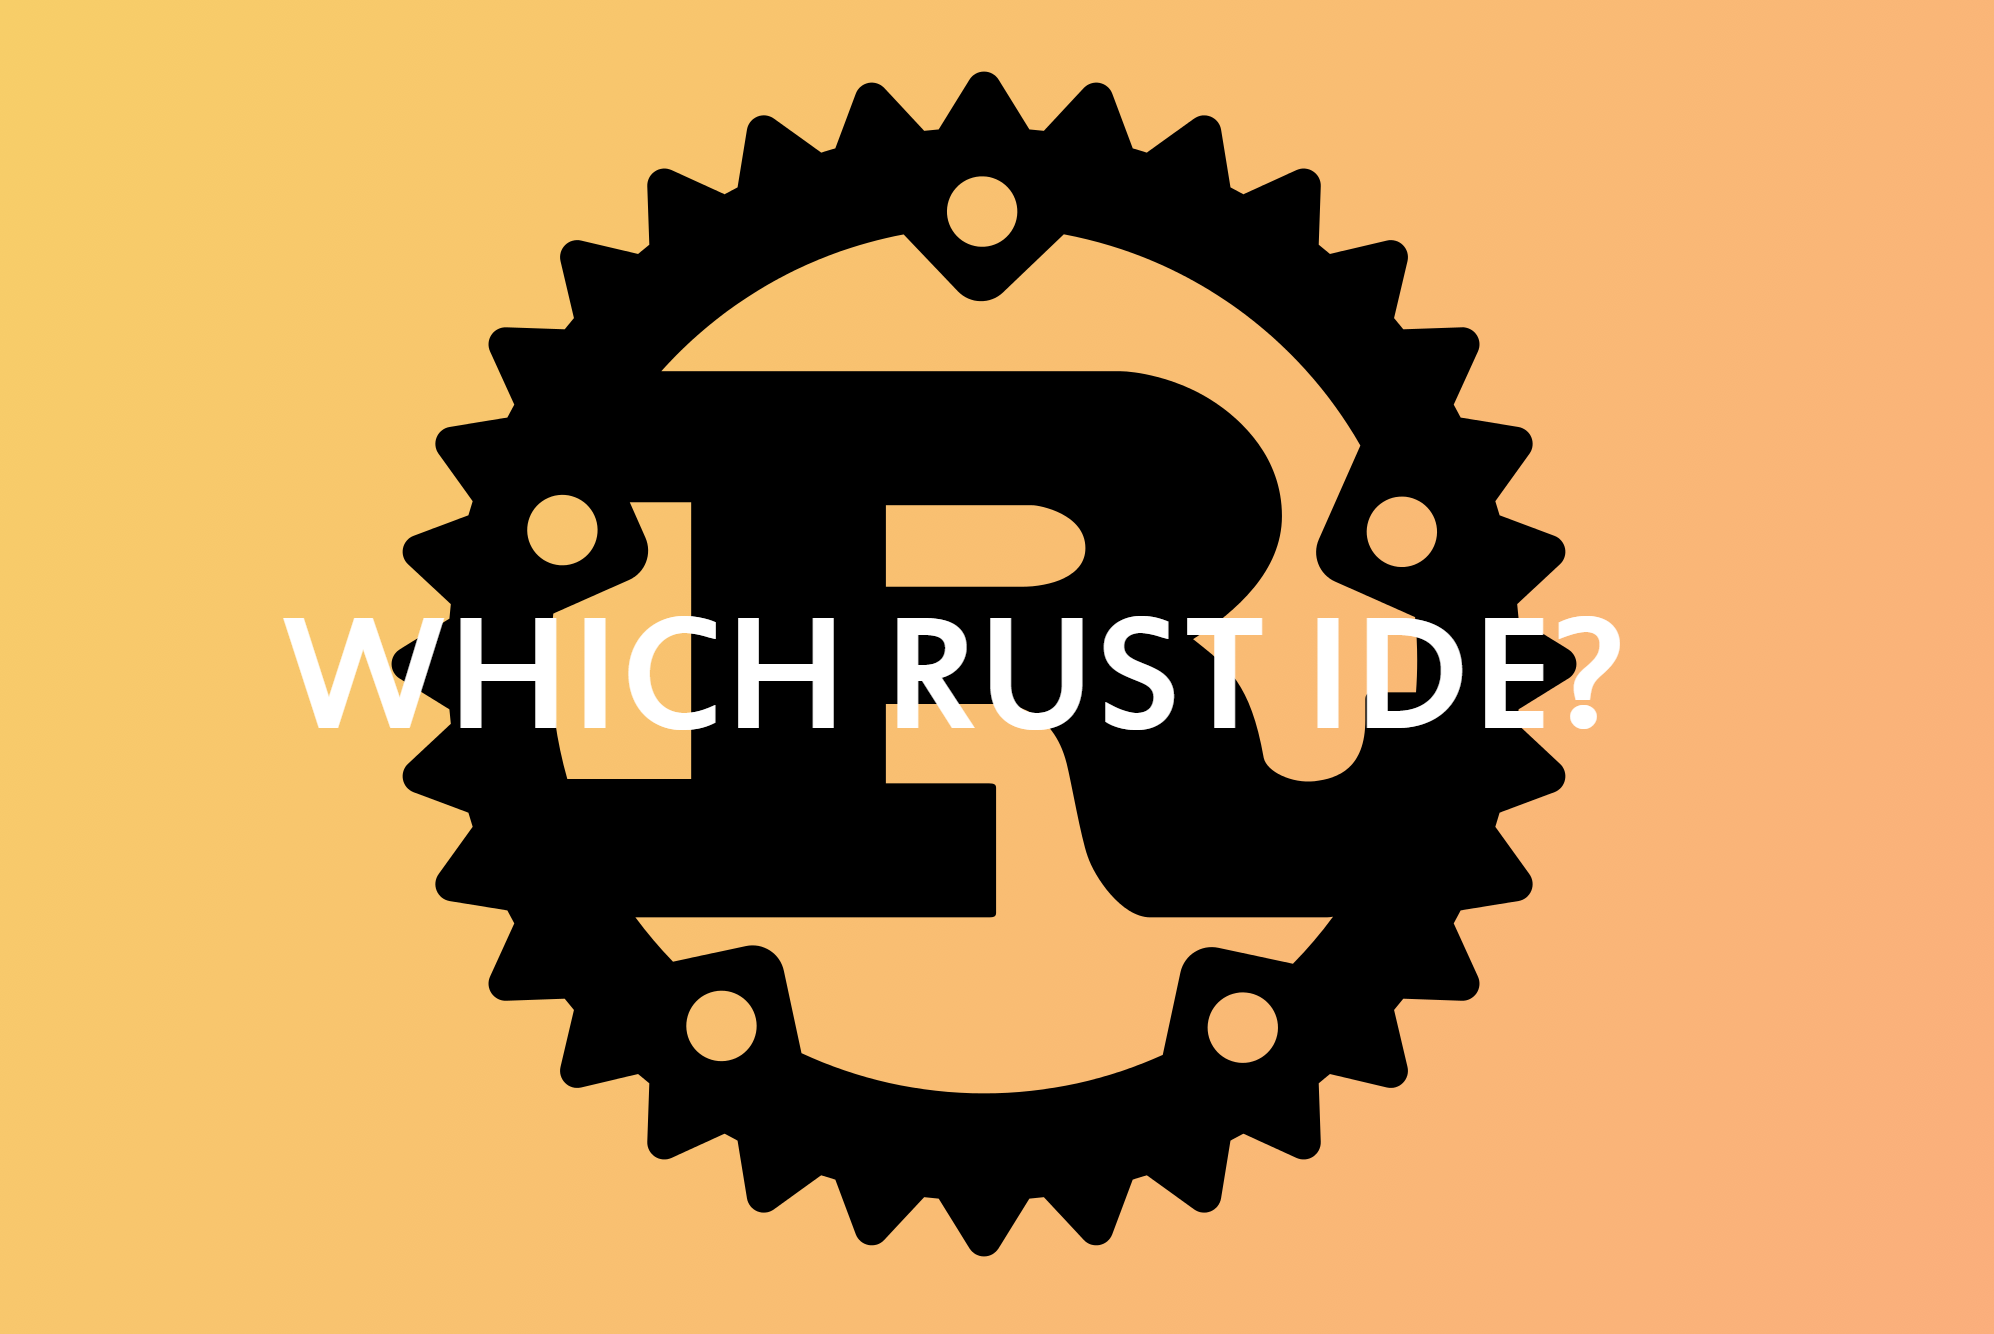 Ide for rust фото 17